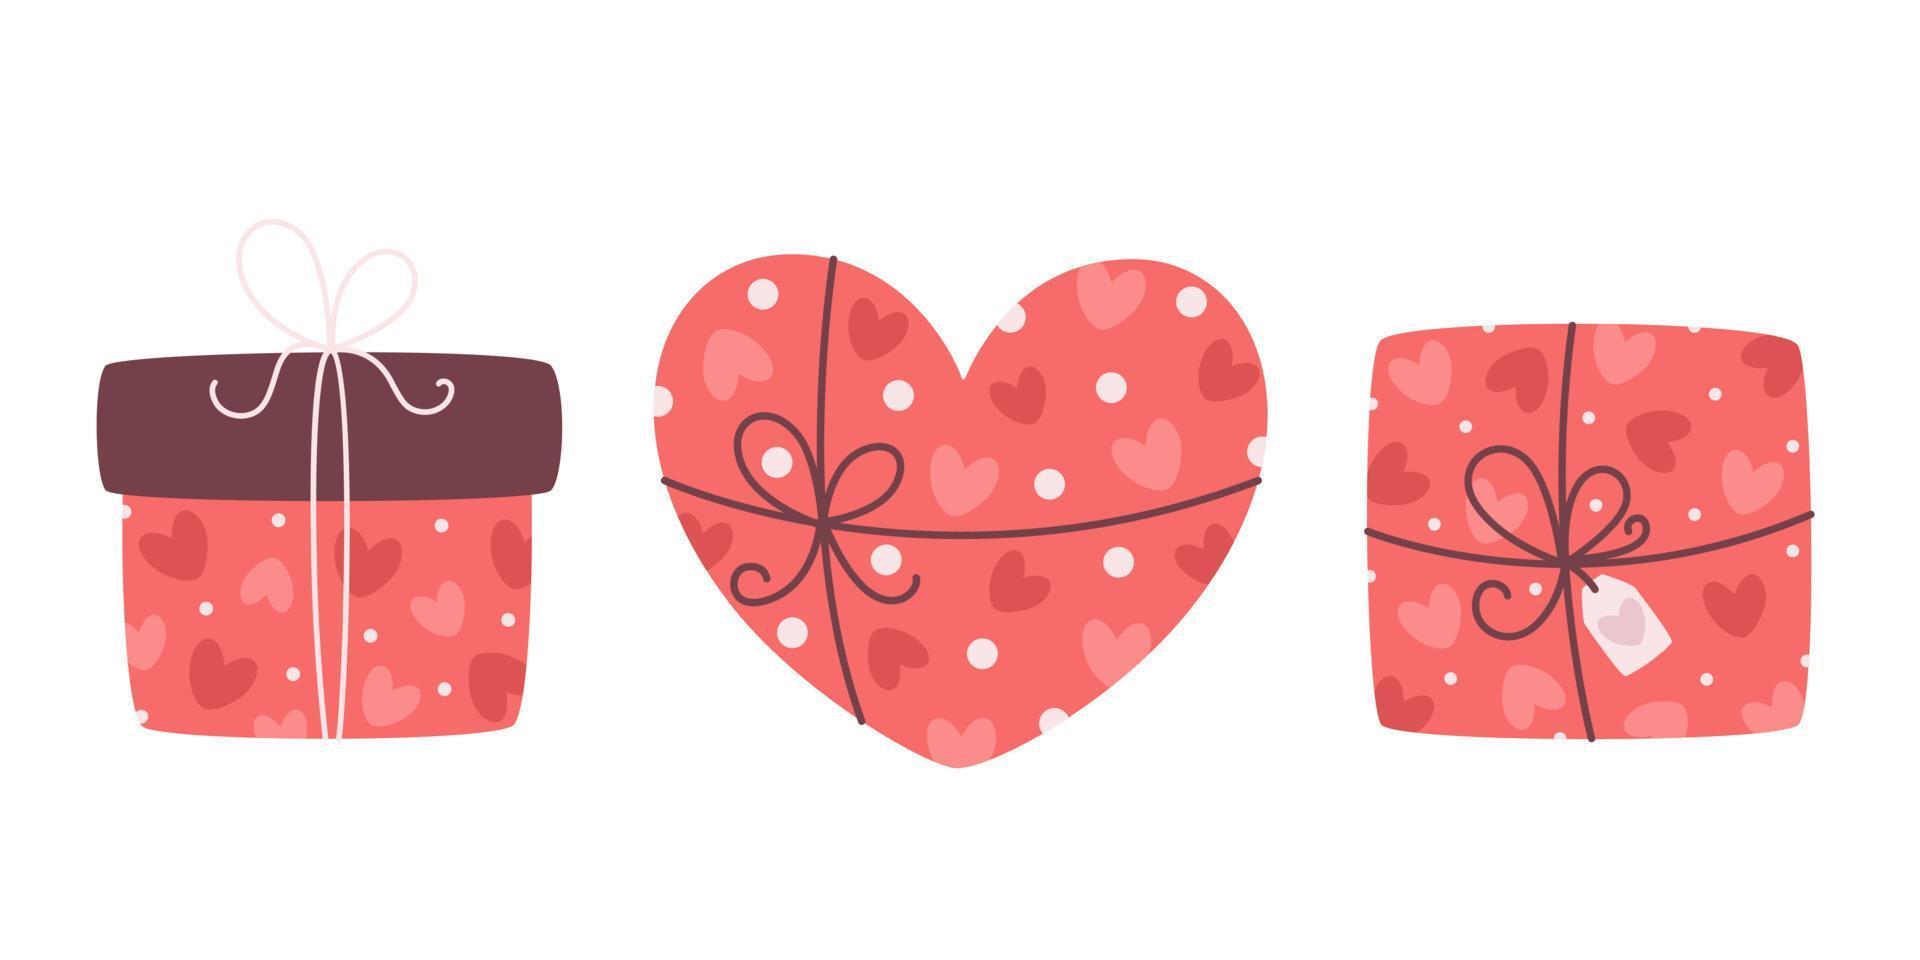 Valentines Day gift collection. Present boxes with hearts vector